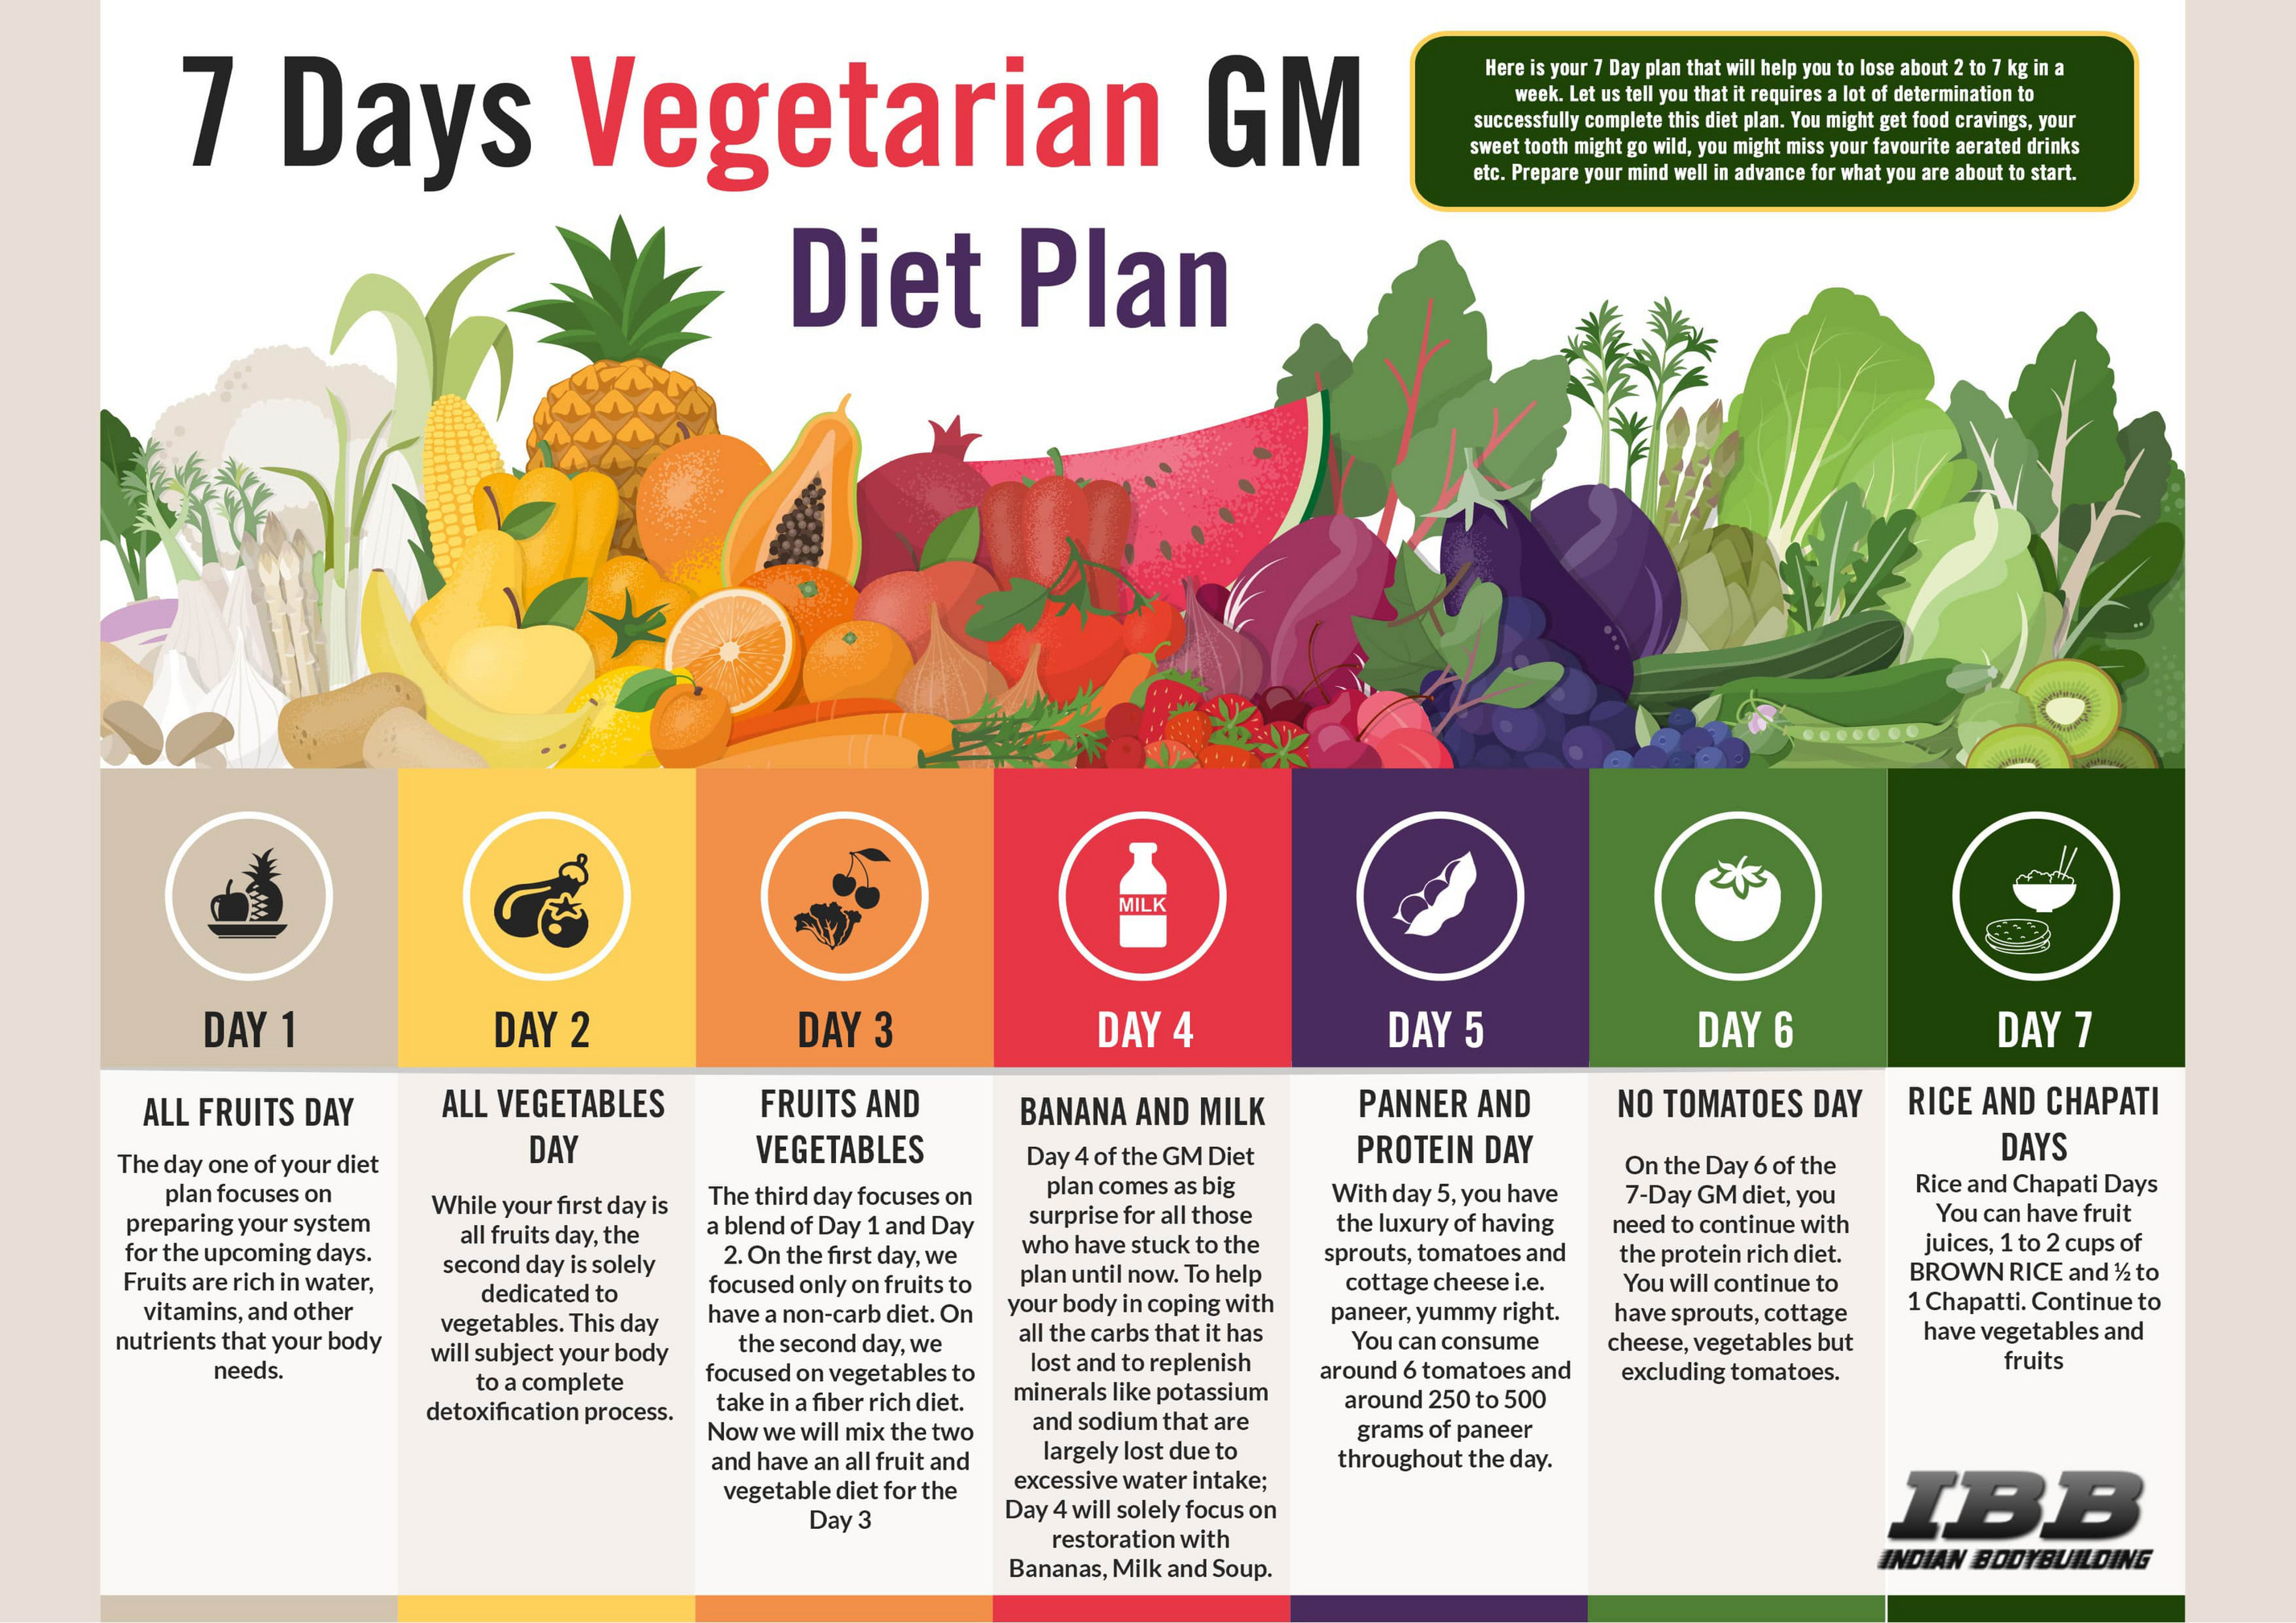 Tamm - 7 Days Vegetarian Gm Diet Plan - Page 1 - Created With Publitas.Com